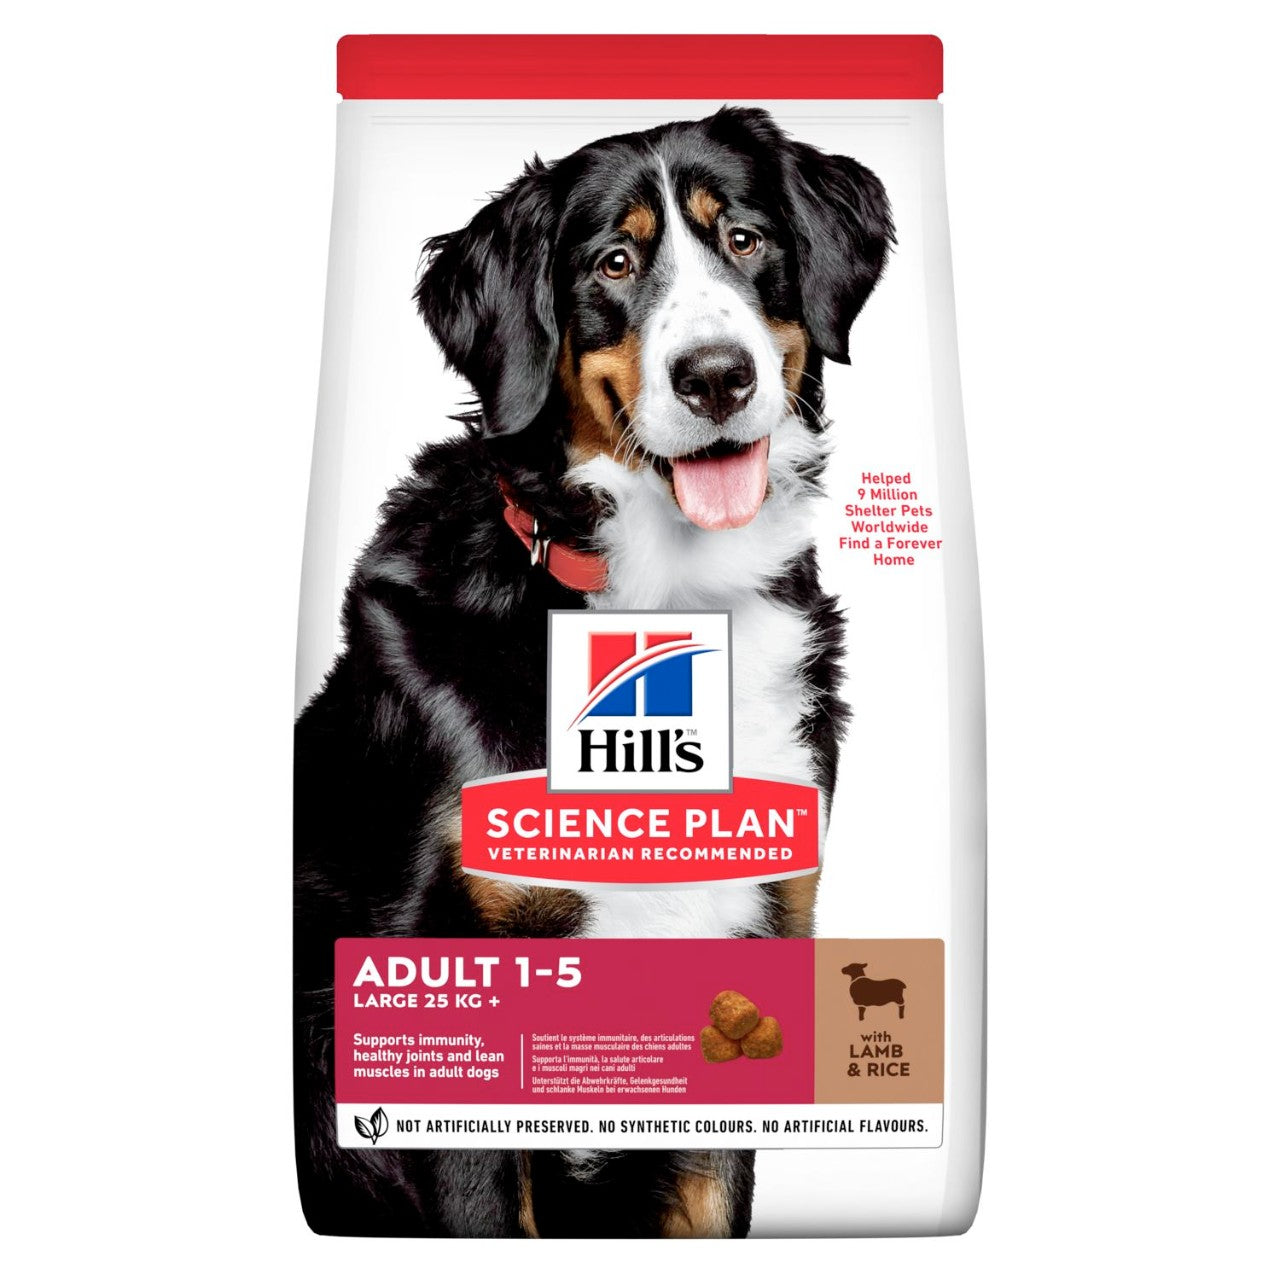 Hill's Science Plan Adult Large Breed Dry Dog Food Lamb & Rice Flavour